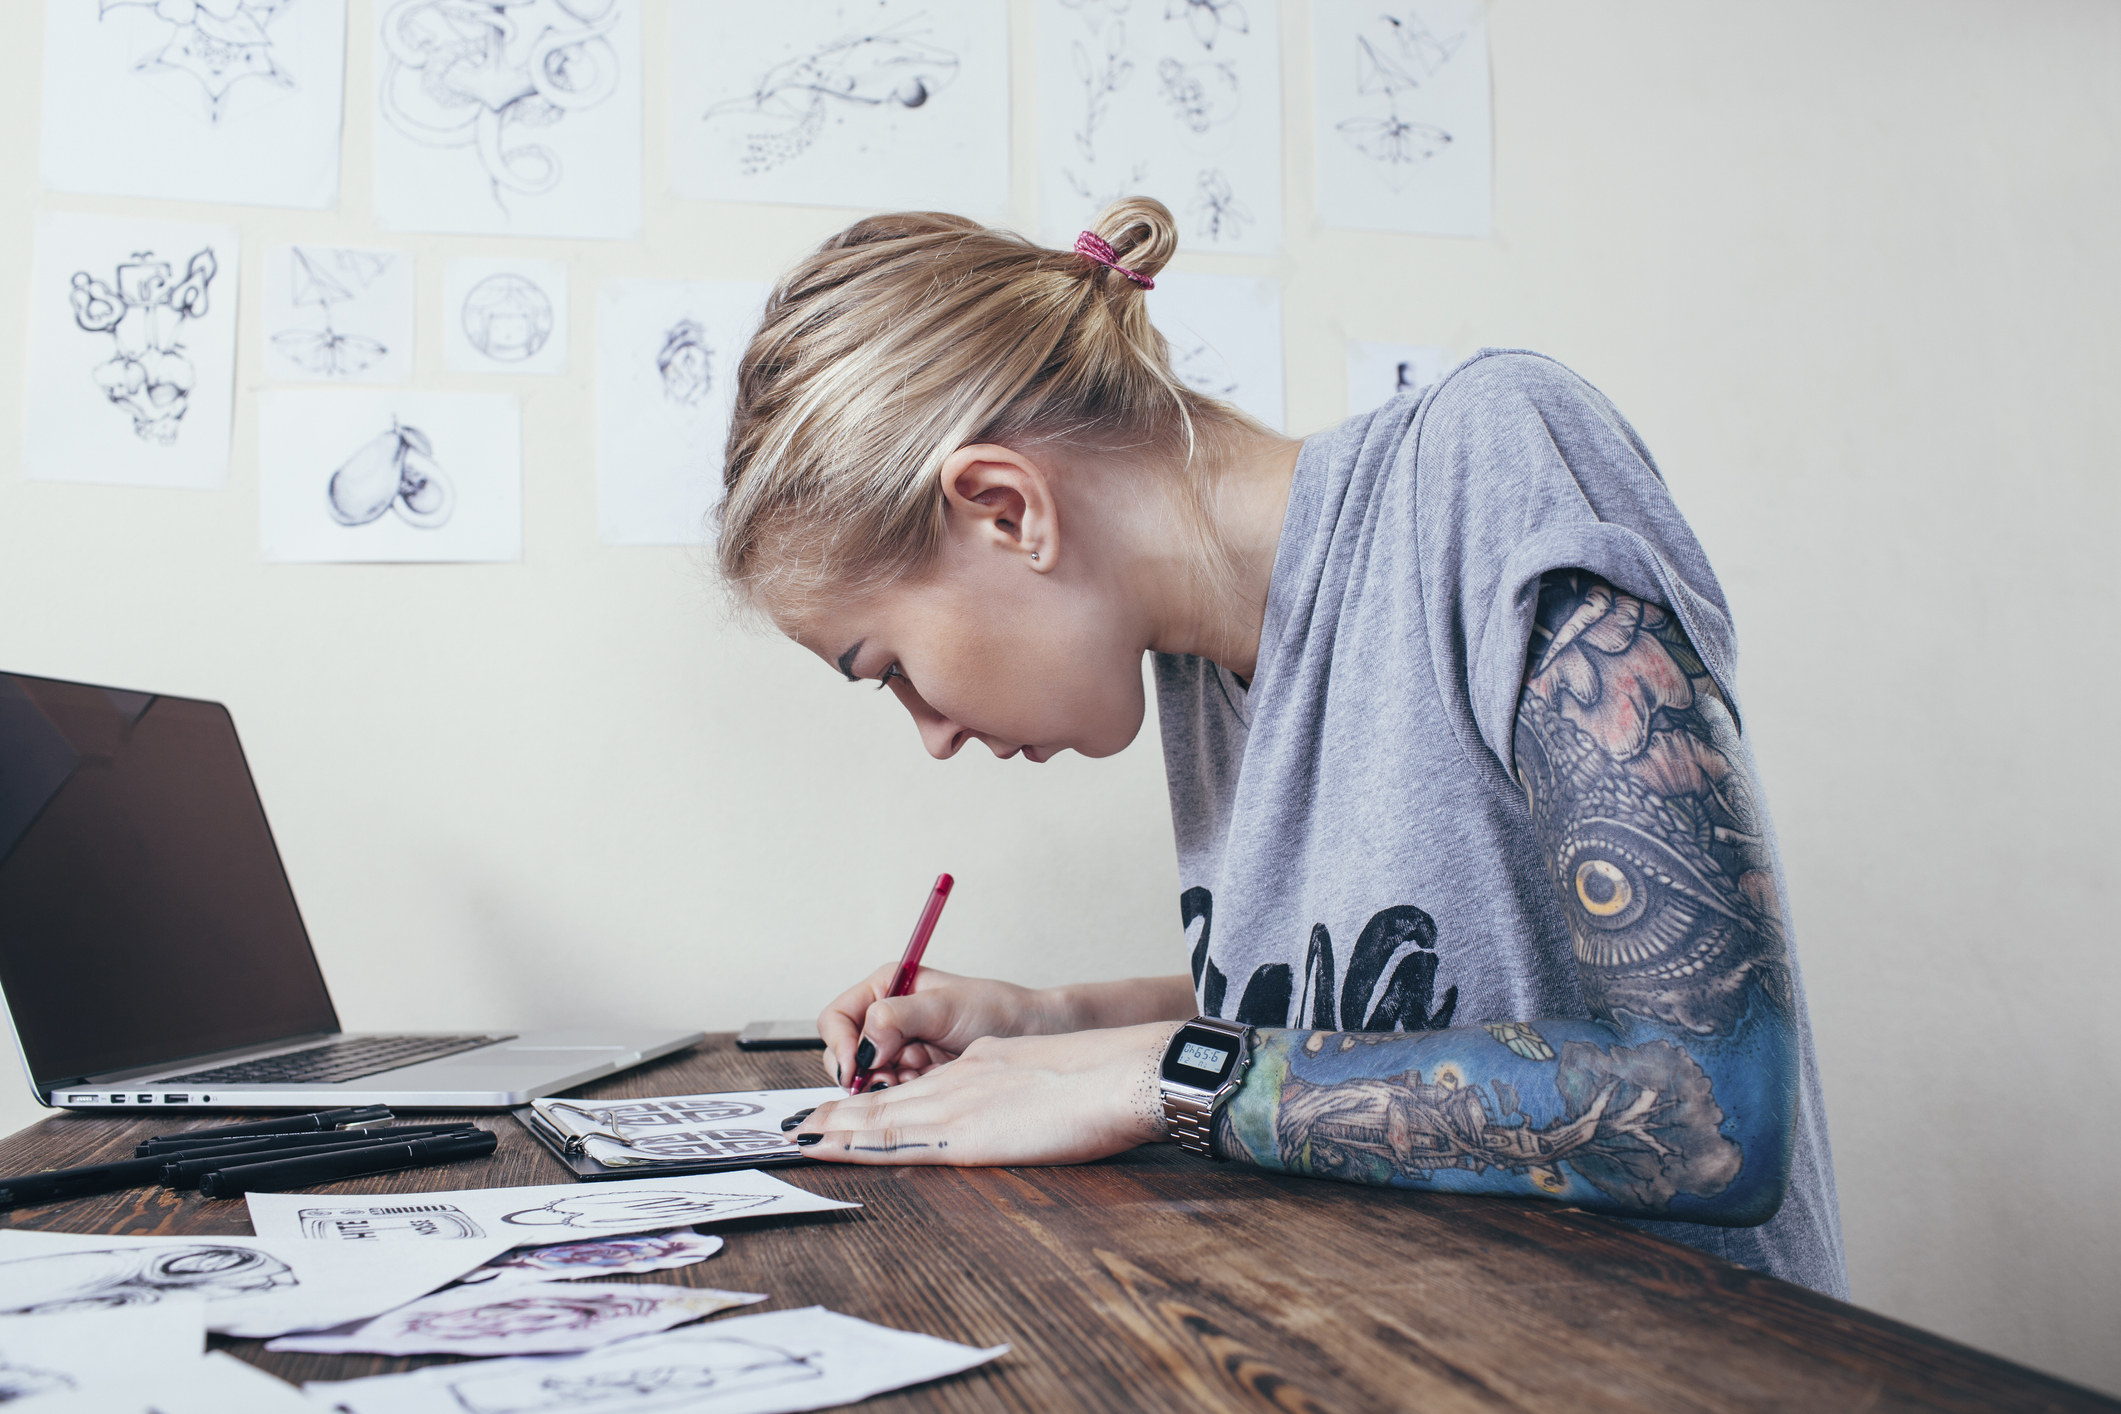 A young artist drawing